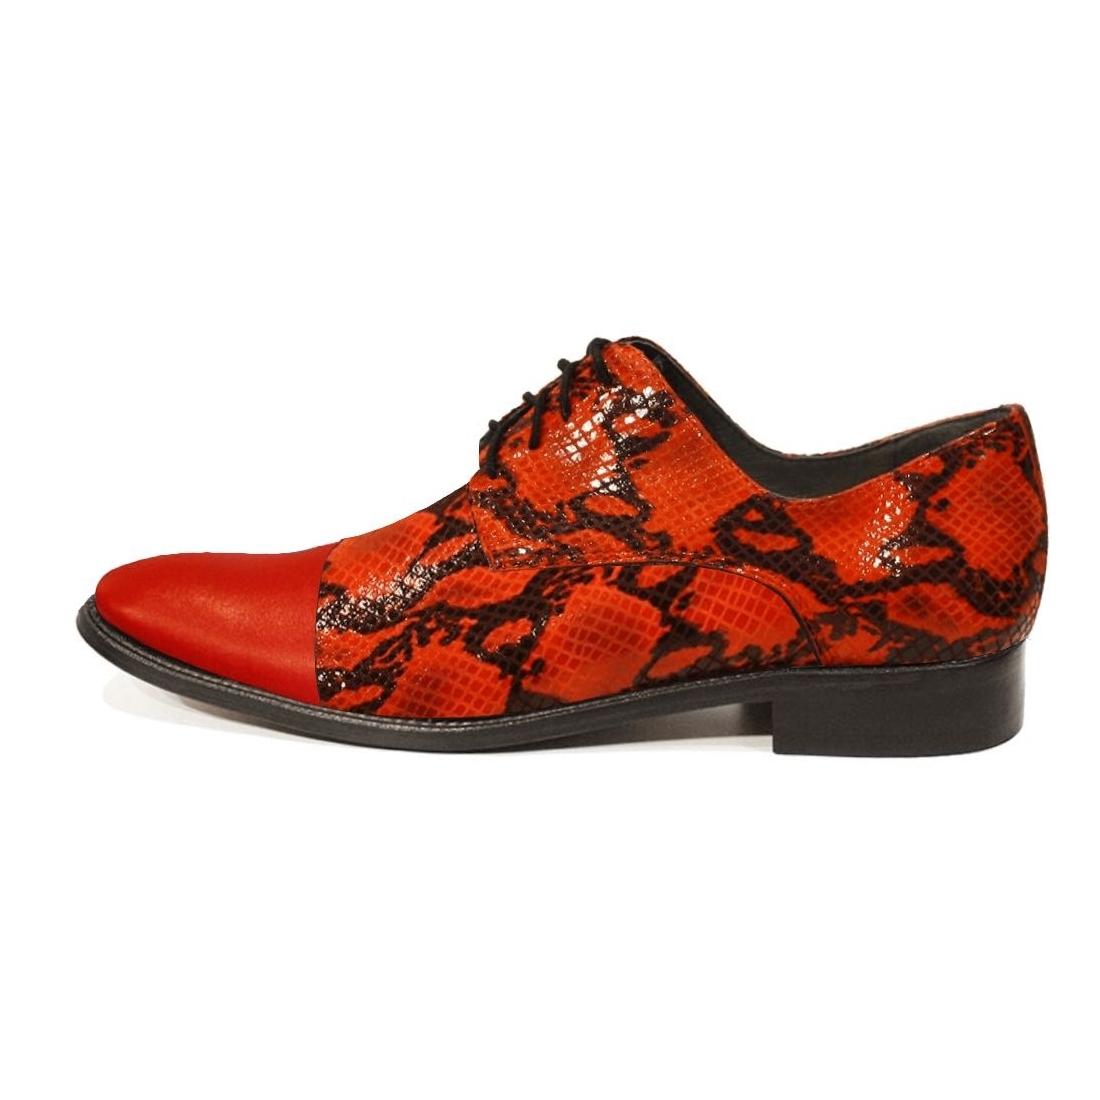 Modello Papello - Classic Shoes - Handmade Colorful Italian Leather Shoes